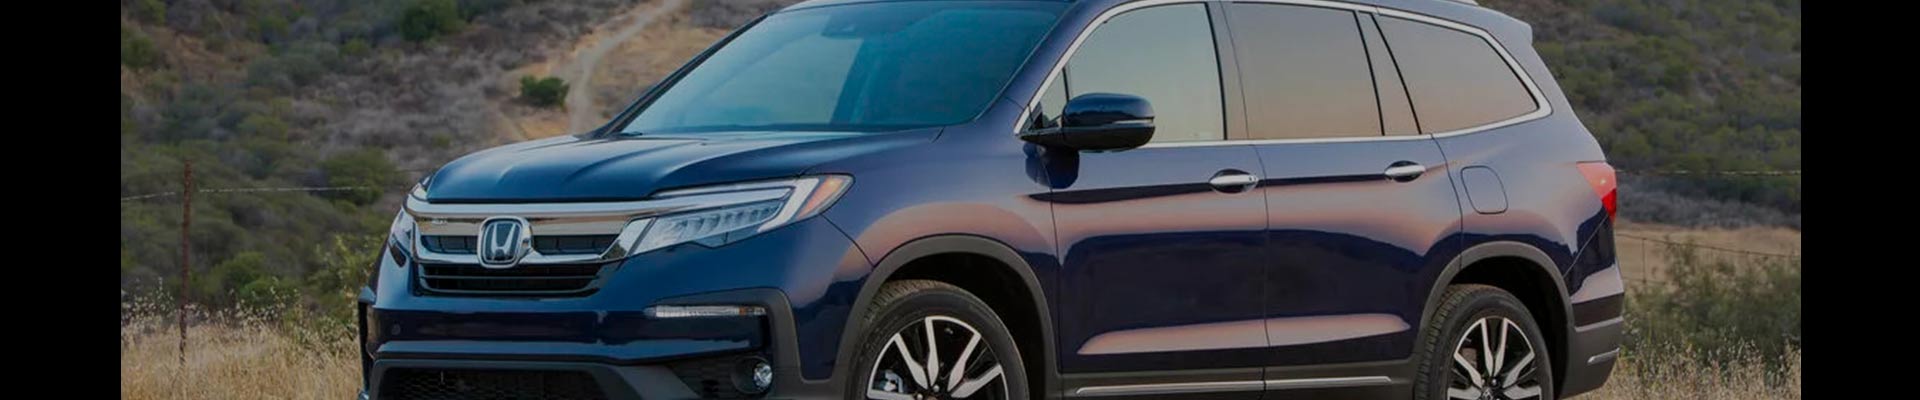 Shop Replacement and OEM 2019 Honda Pilot Parts with Discounted Price on the Net